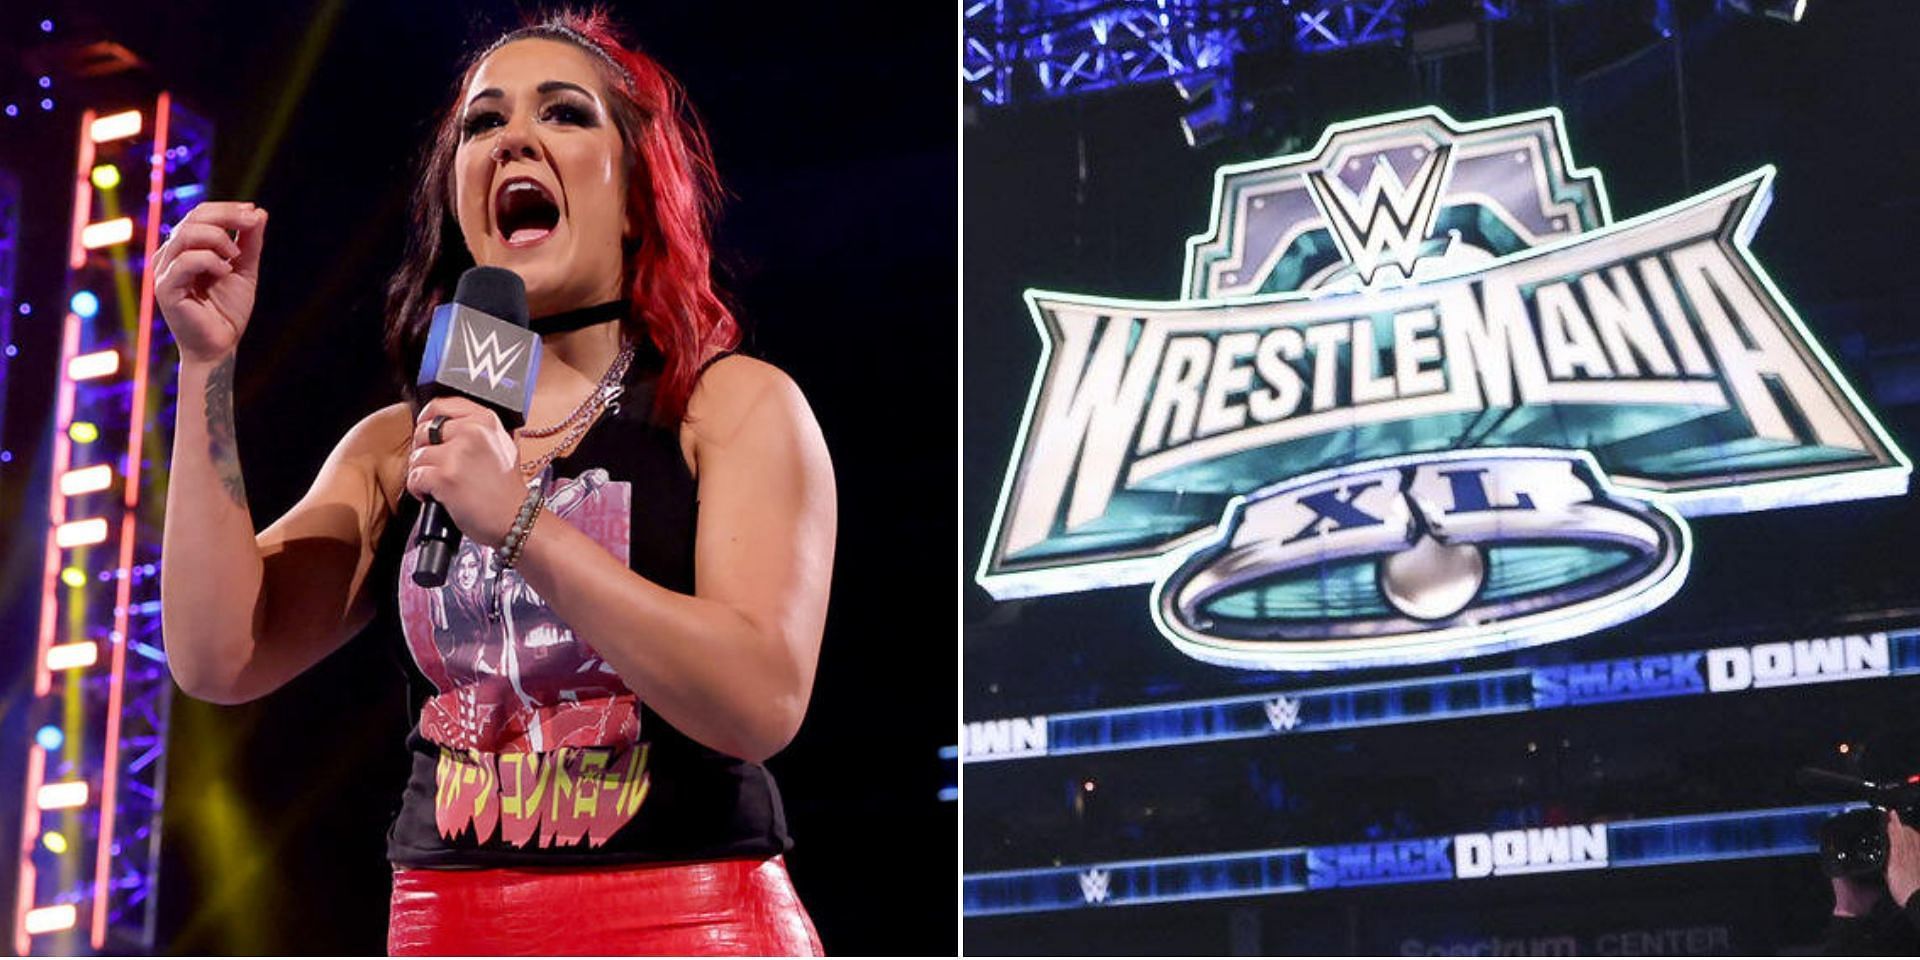 Bayley has never had a singles match at WrestleMania before